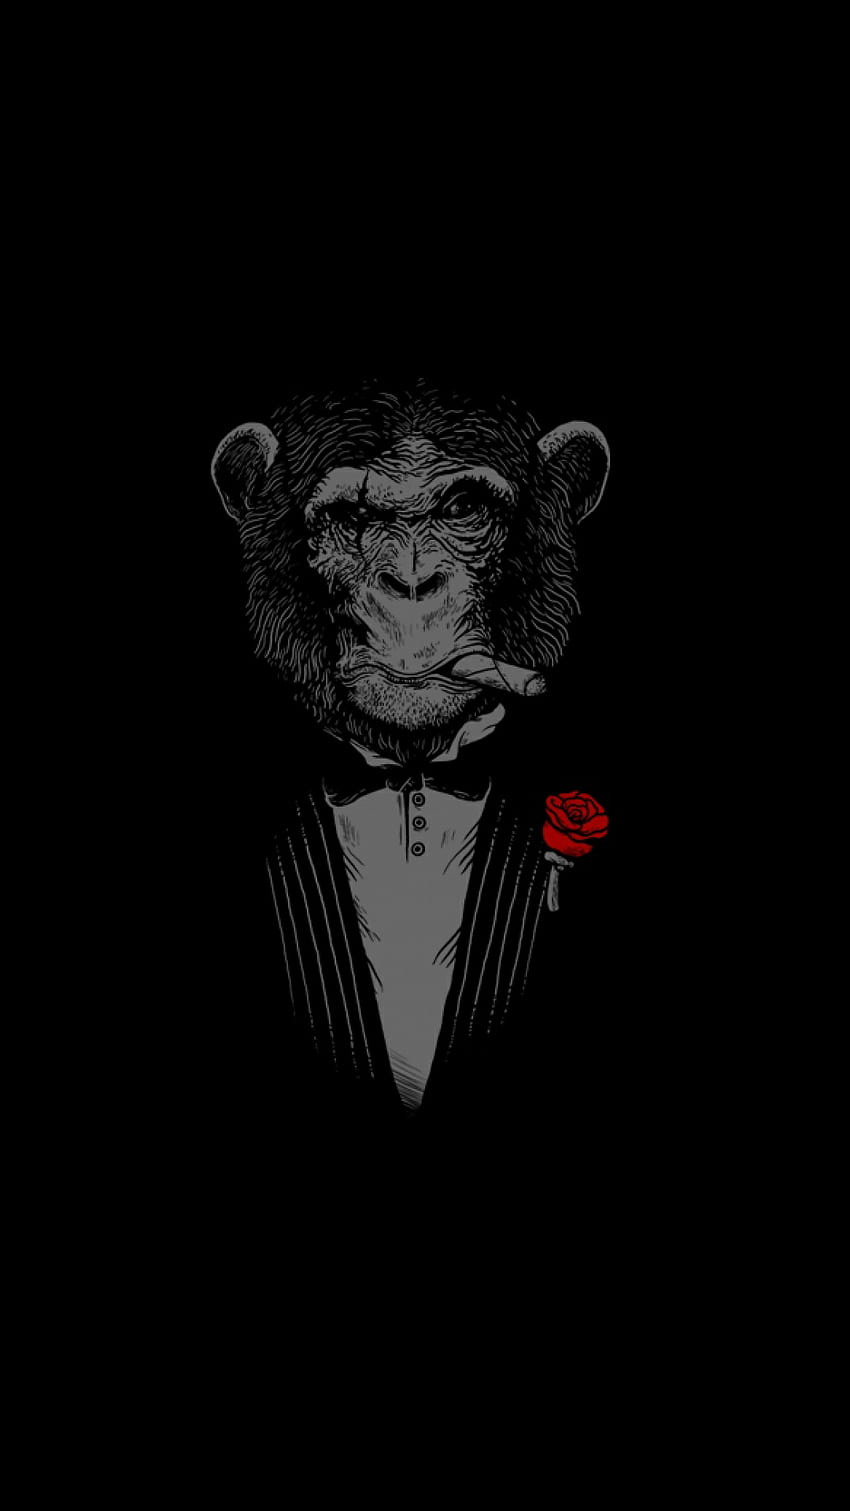 Baddass walIpaper I found in one of my apps. ( OMELD APP). Monkey , Pure black , Samsung android, Super AMOLED Display HD phone wallpaper